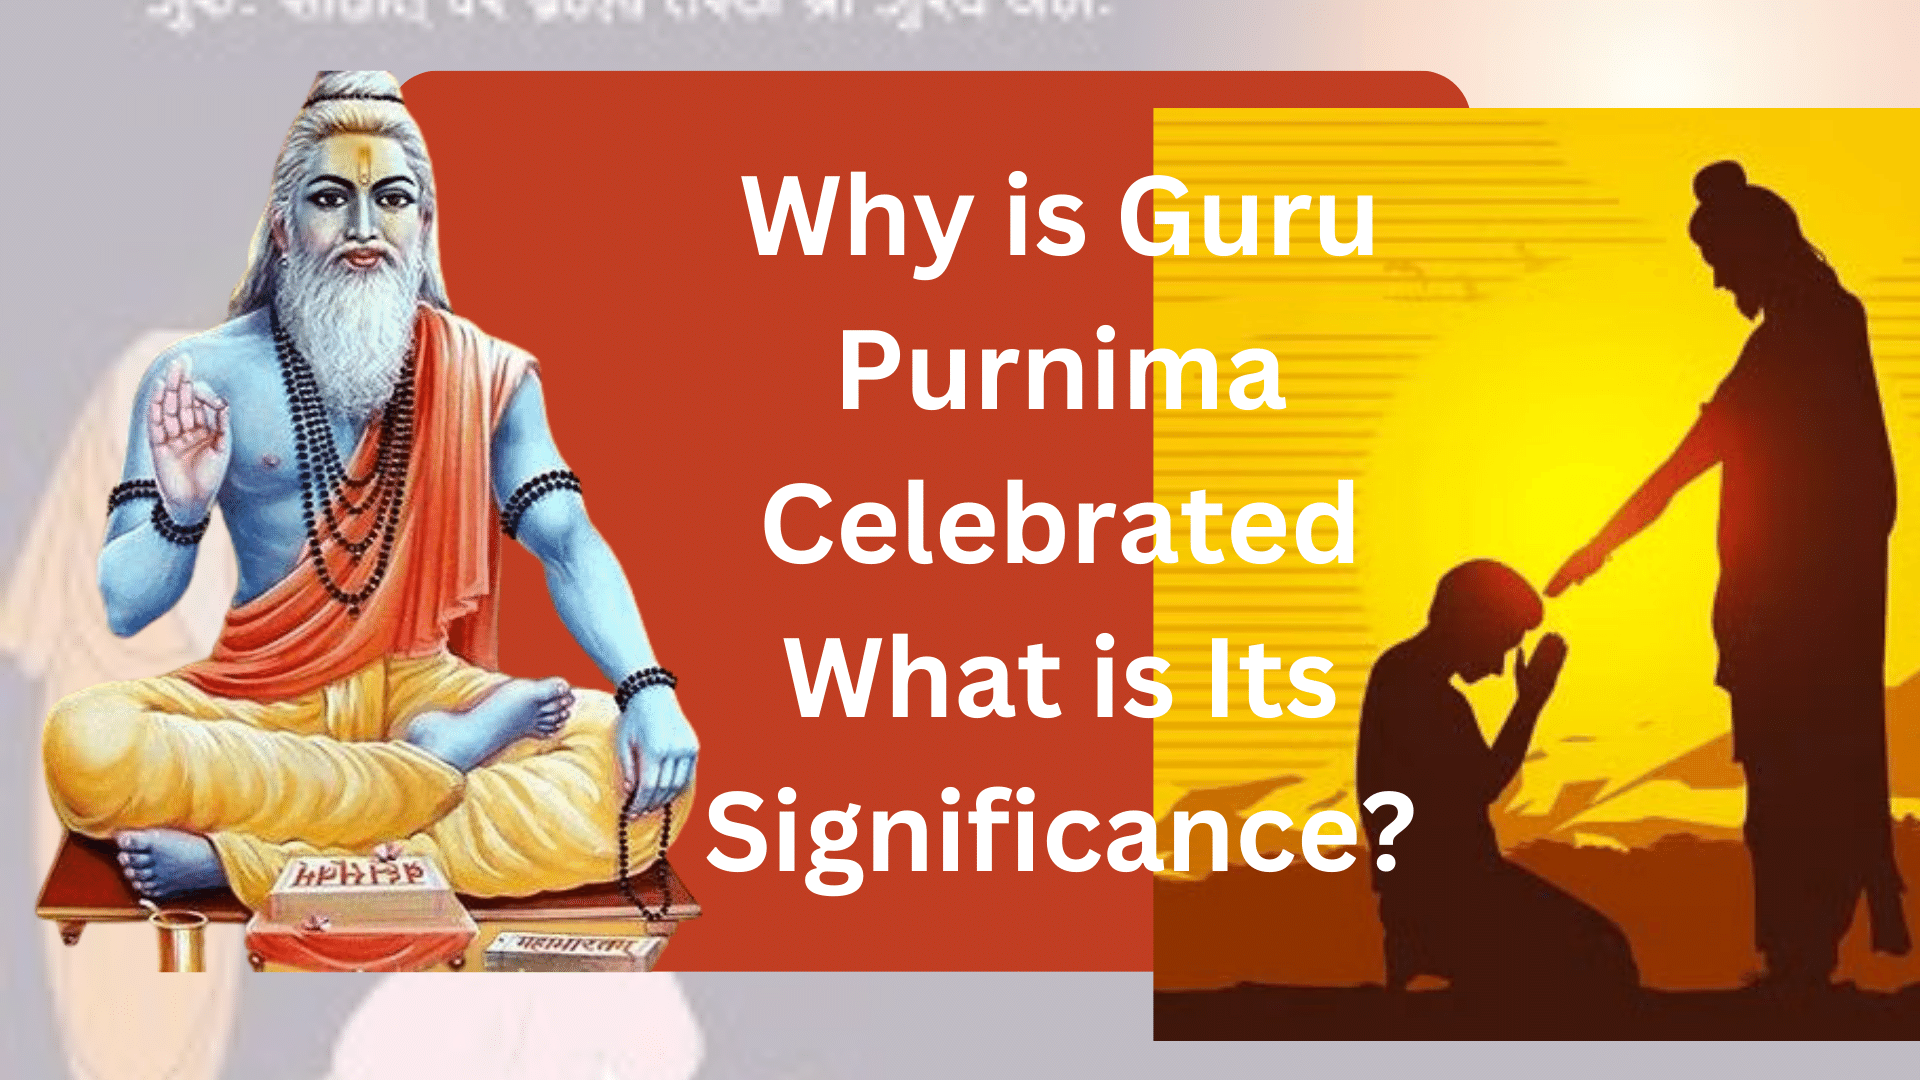 Why is Guru Purnima Celebrated, and What is Its Significance?